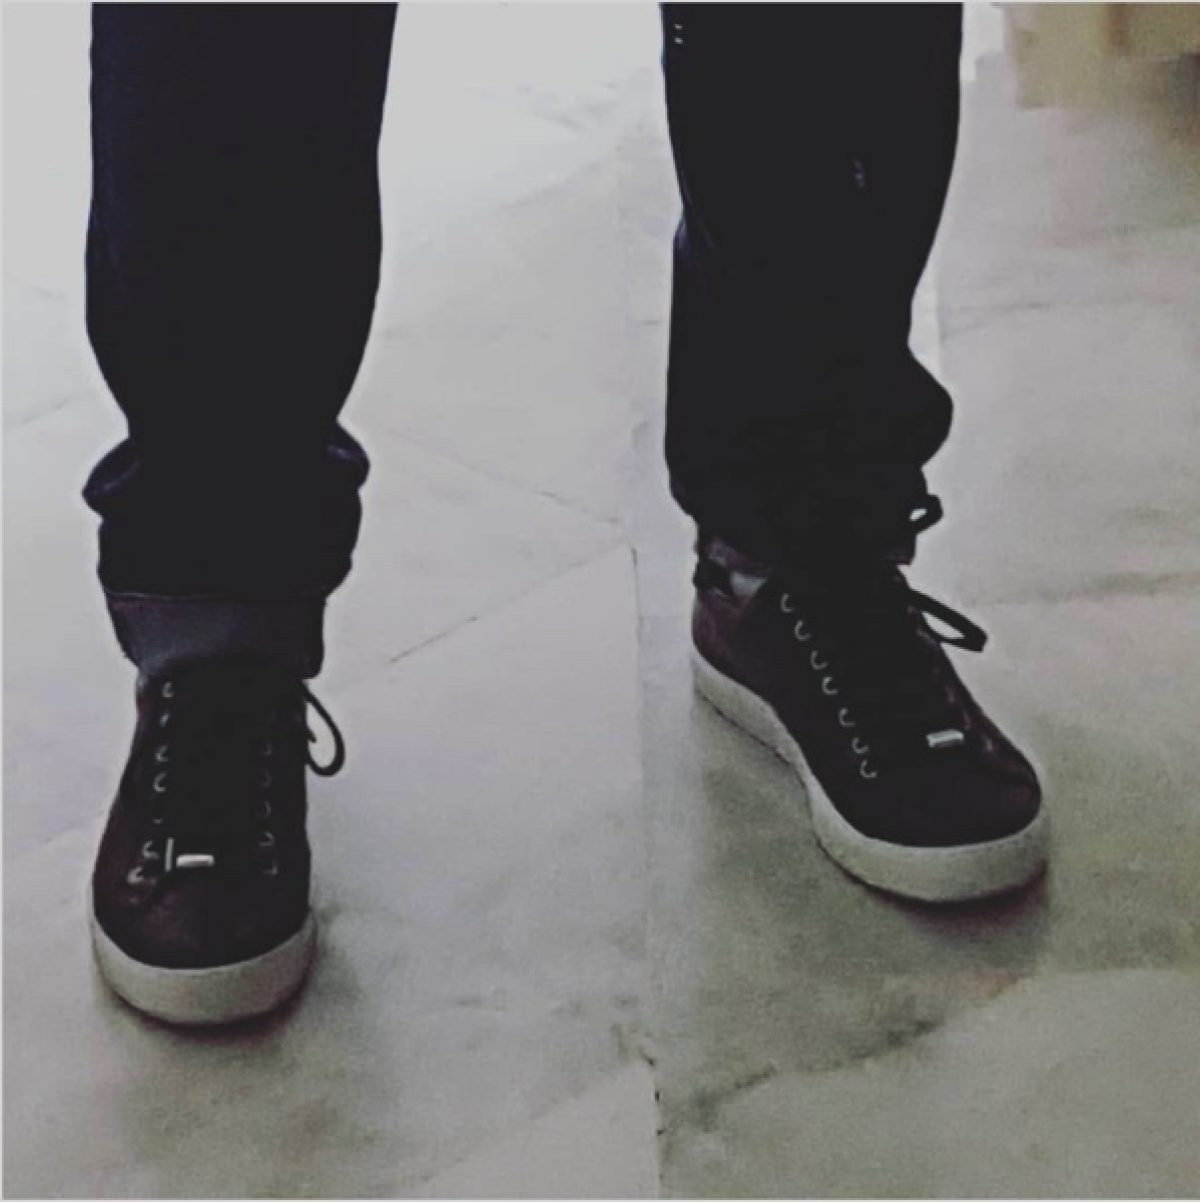 black sneakers, white soles, bottom of legs in black jeans with rolled cuffs, on a grey concrete floor